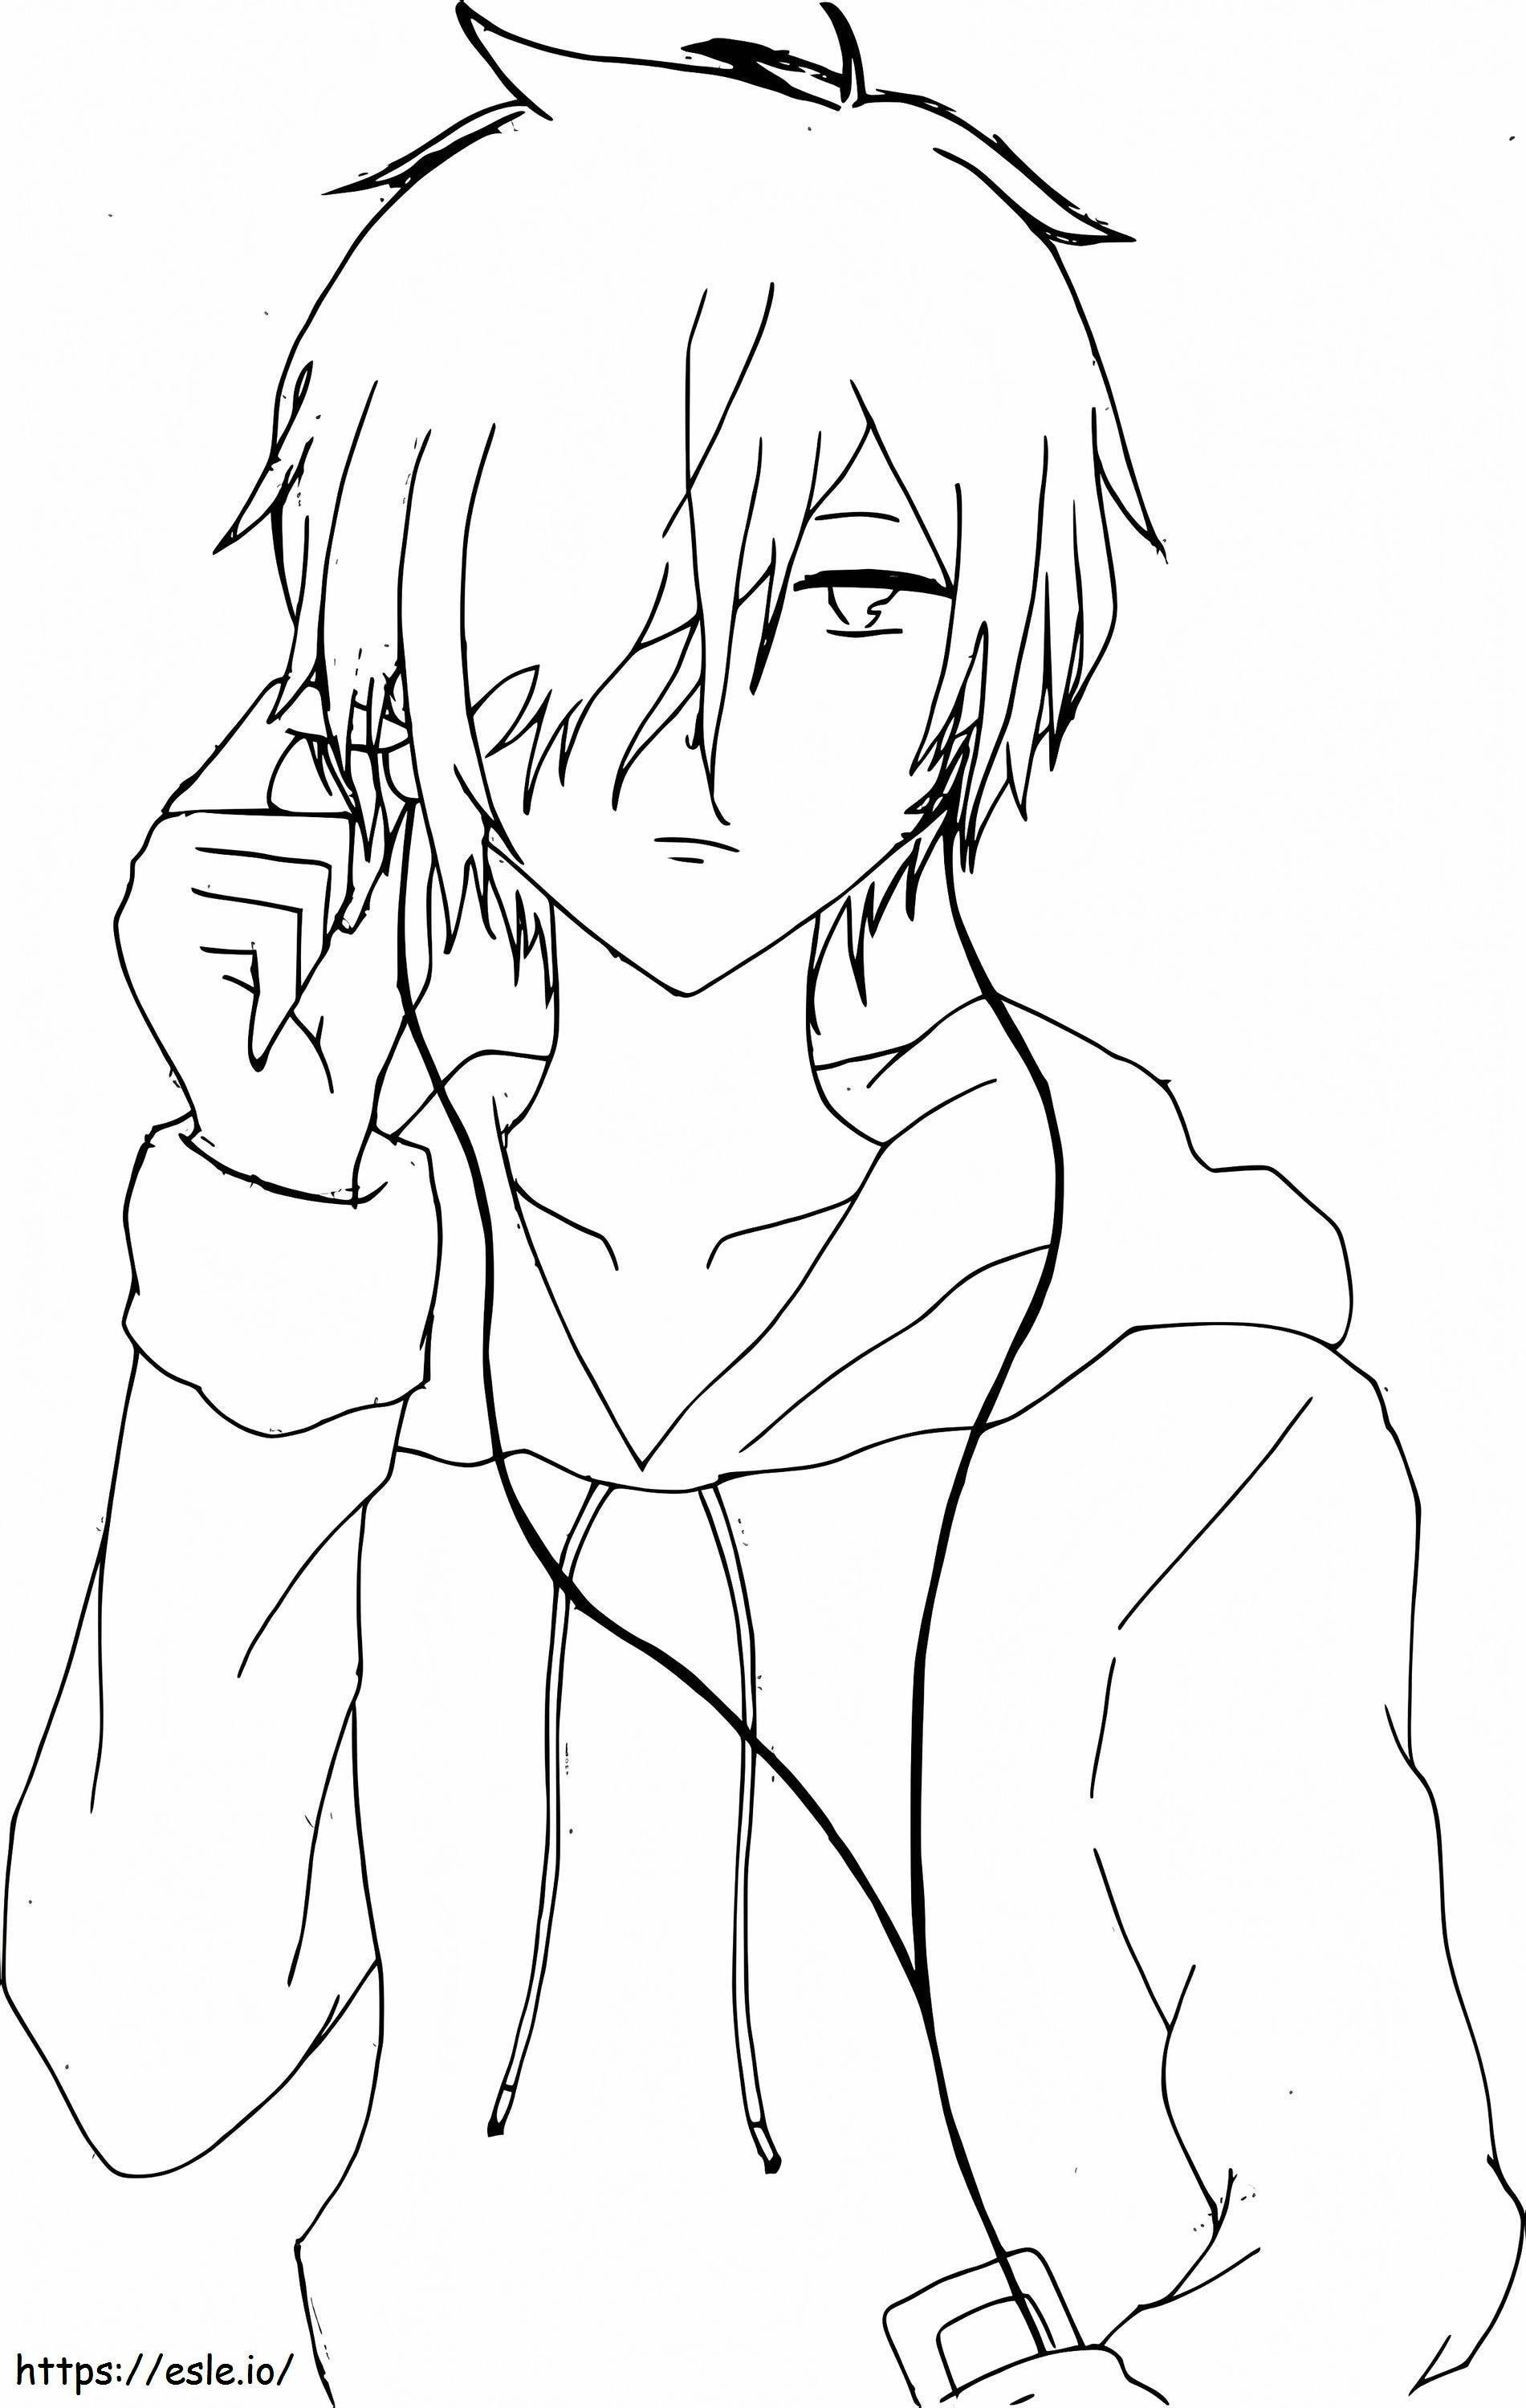 Anime Boy With Headphones coloring page